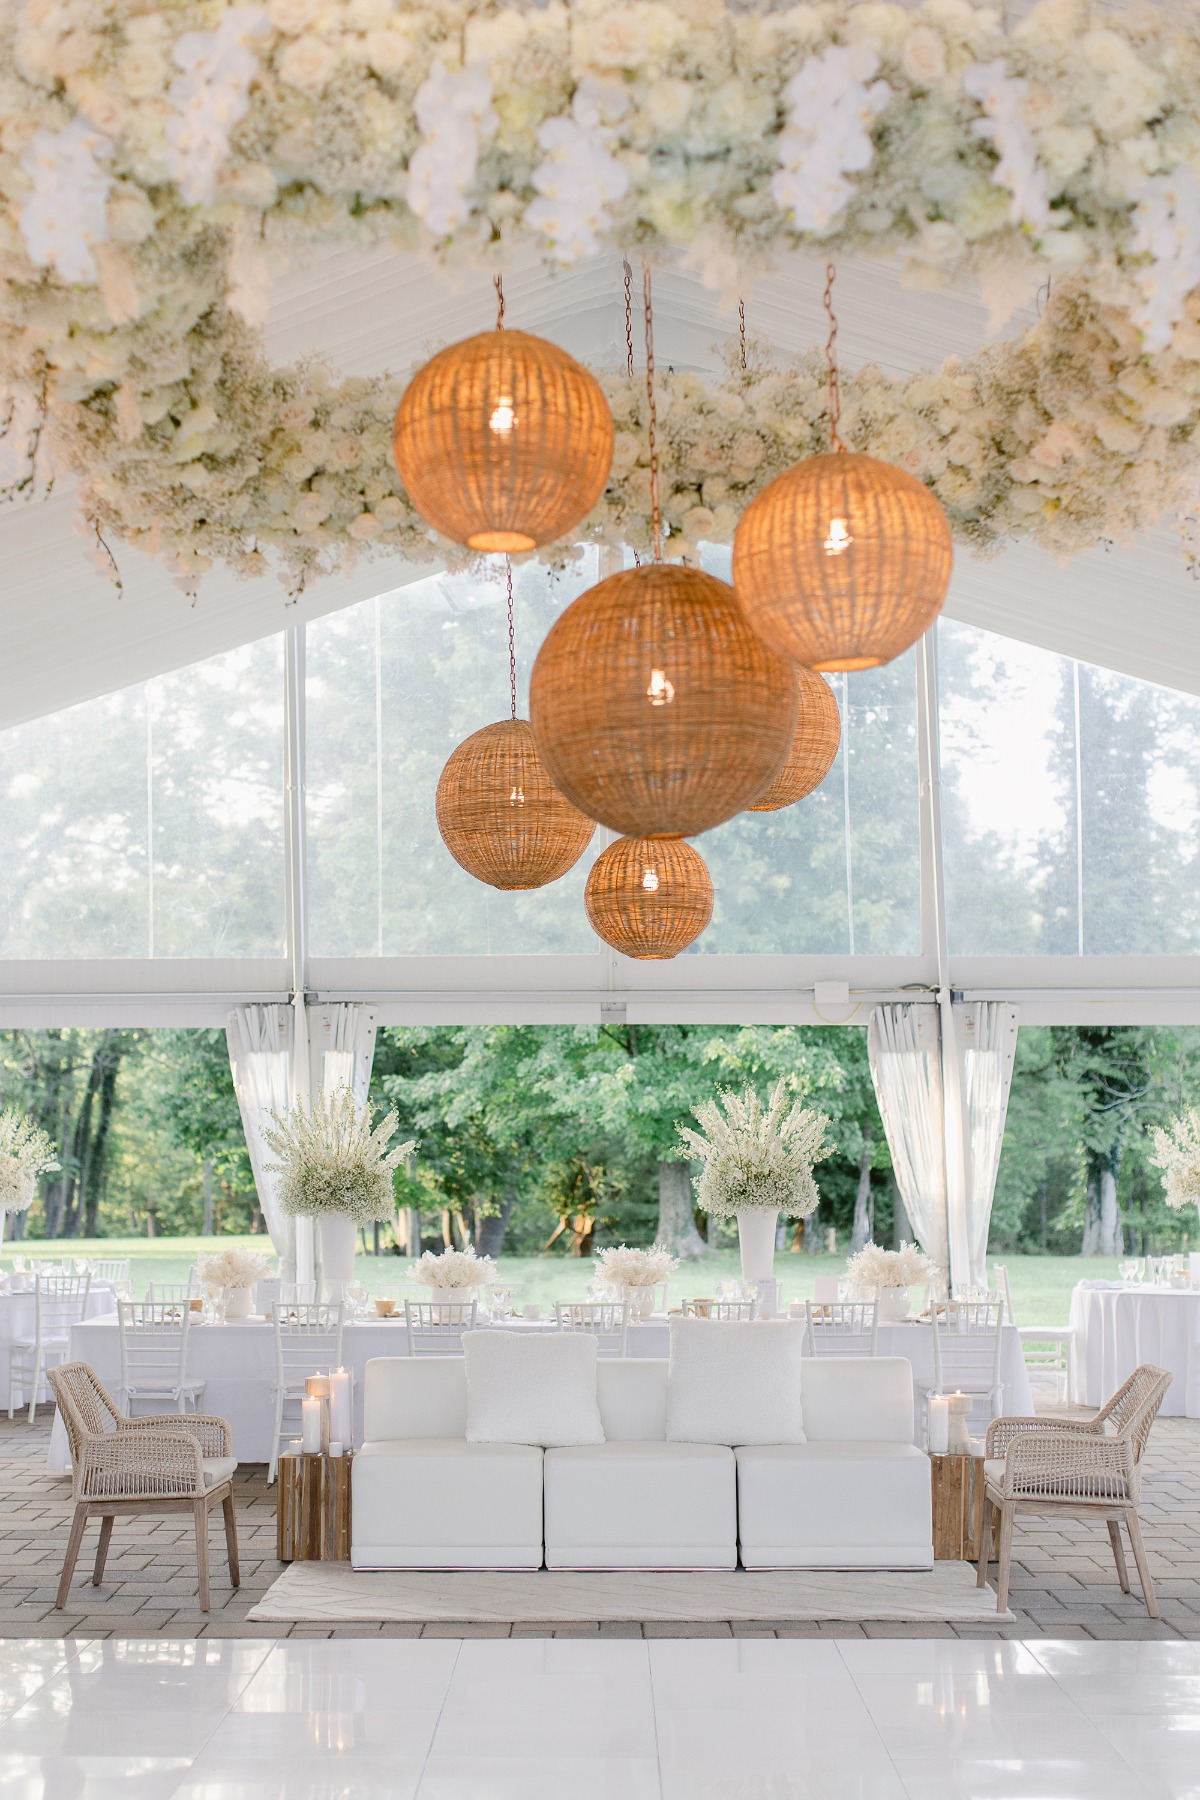 Reception area with rattan chandeliers